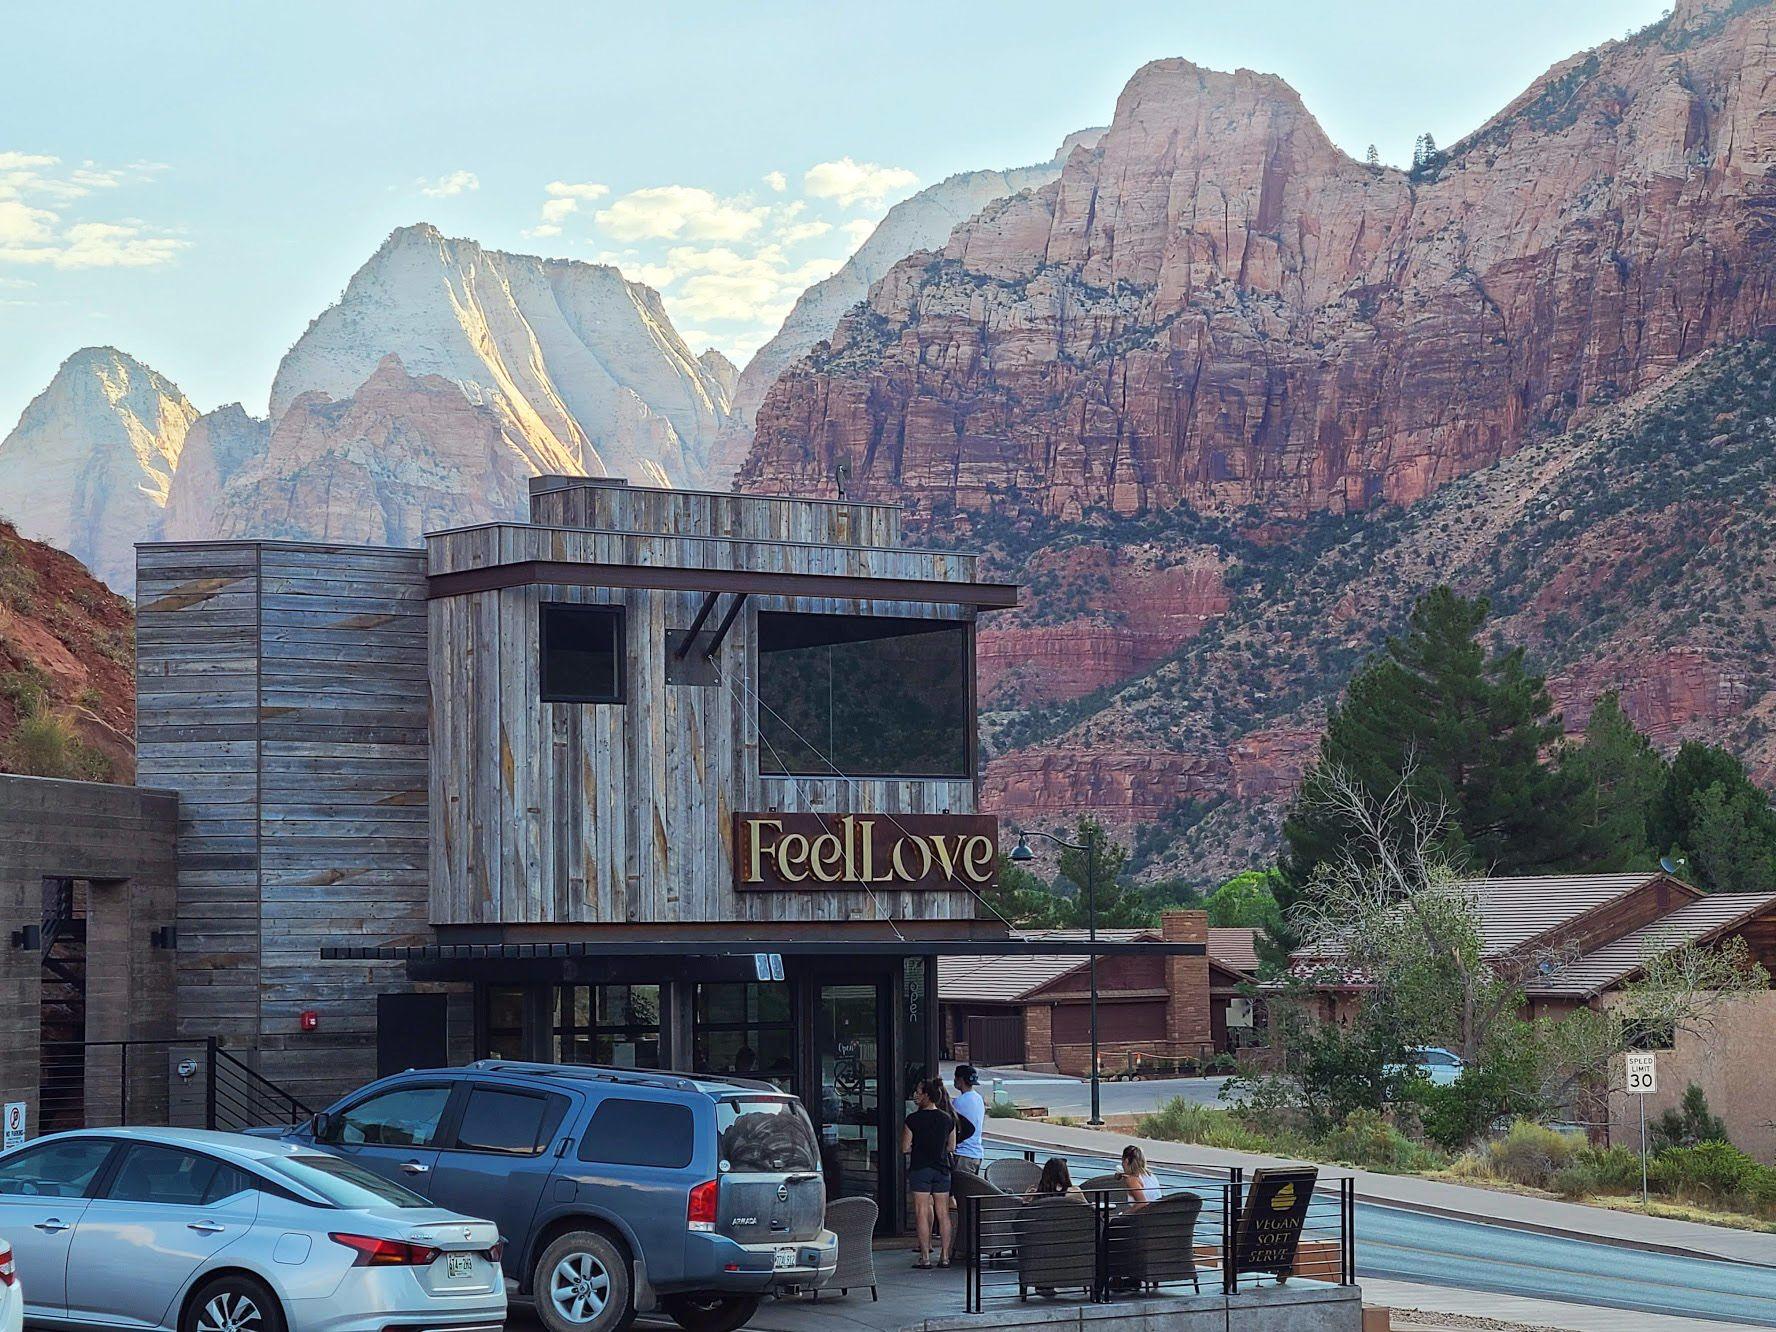 A rustic coffee shop that reads "Feel Love" with the orange cliffs of Zion in the background.